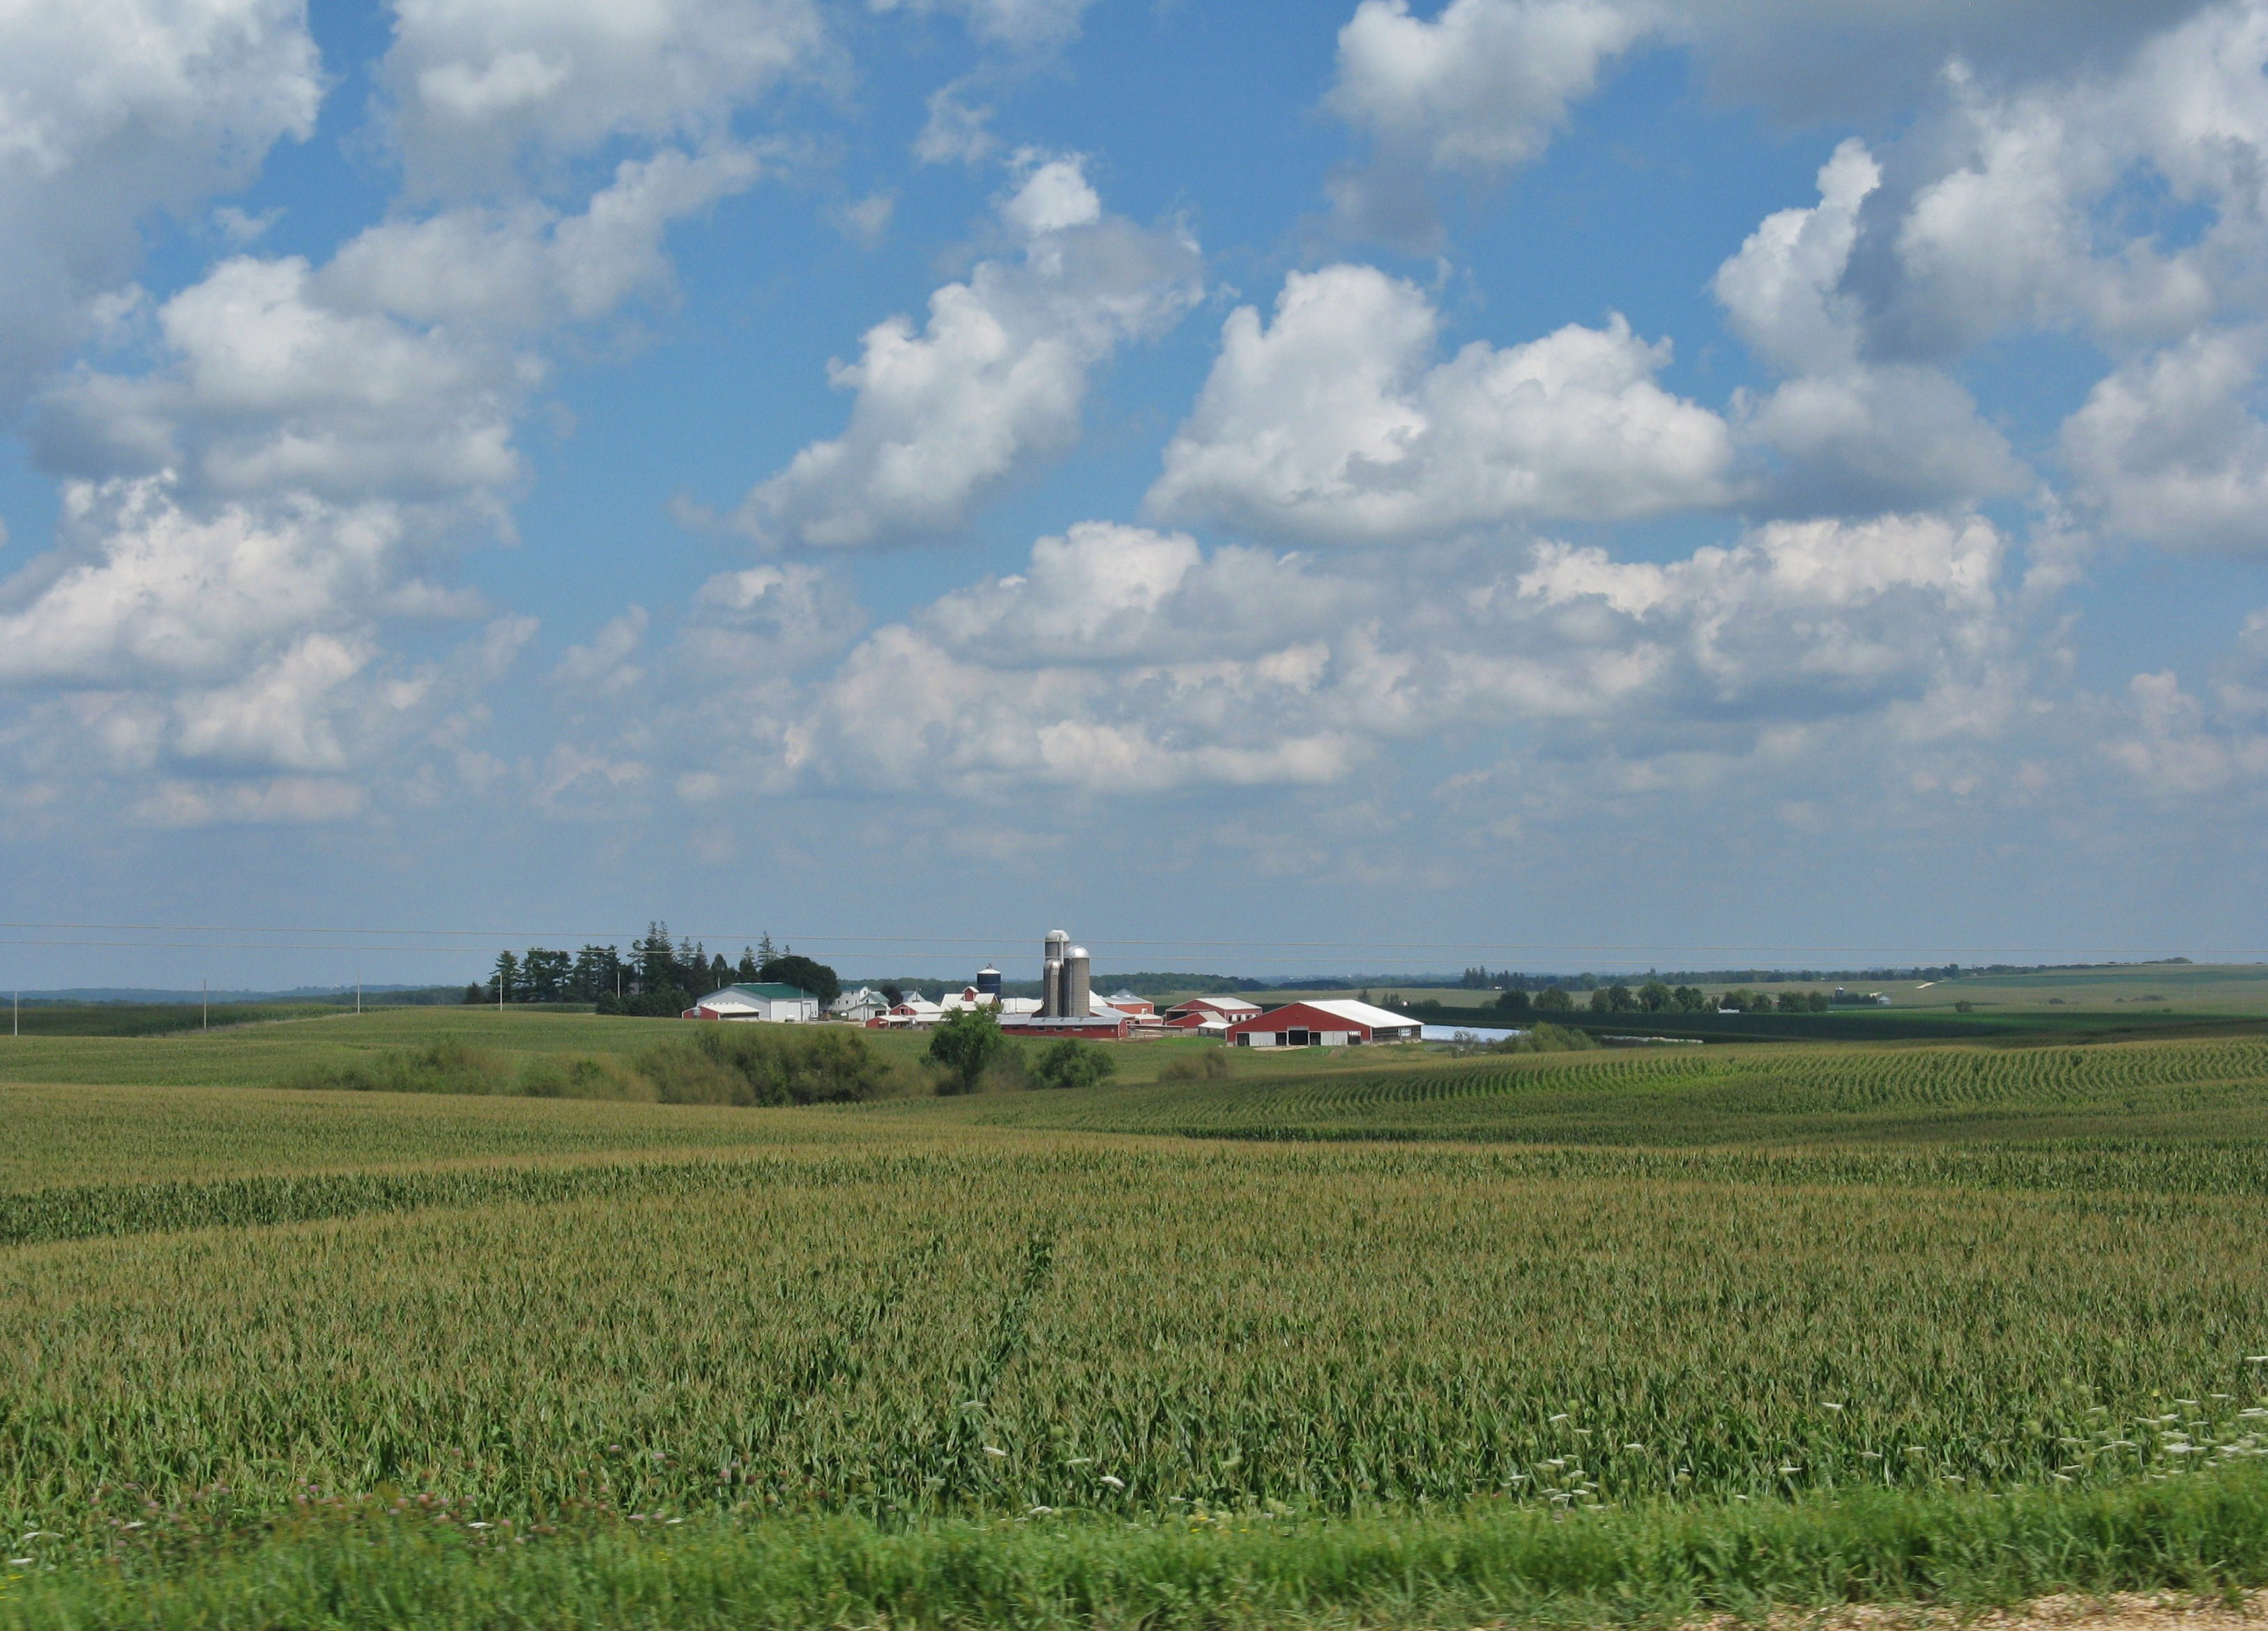 Vast fields of green extend over small, rolling hills and seemingly to the horizon. In the distance is a cluster of agricultural buildings. The sky is blue with numerous white, fluffy clouds.